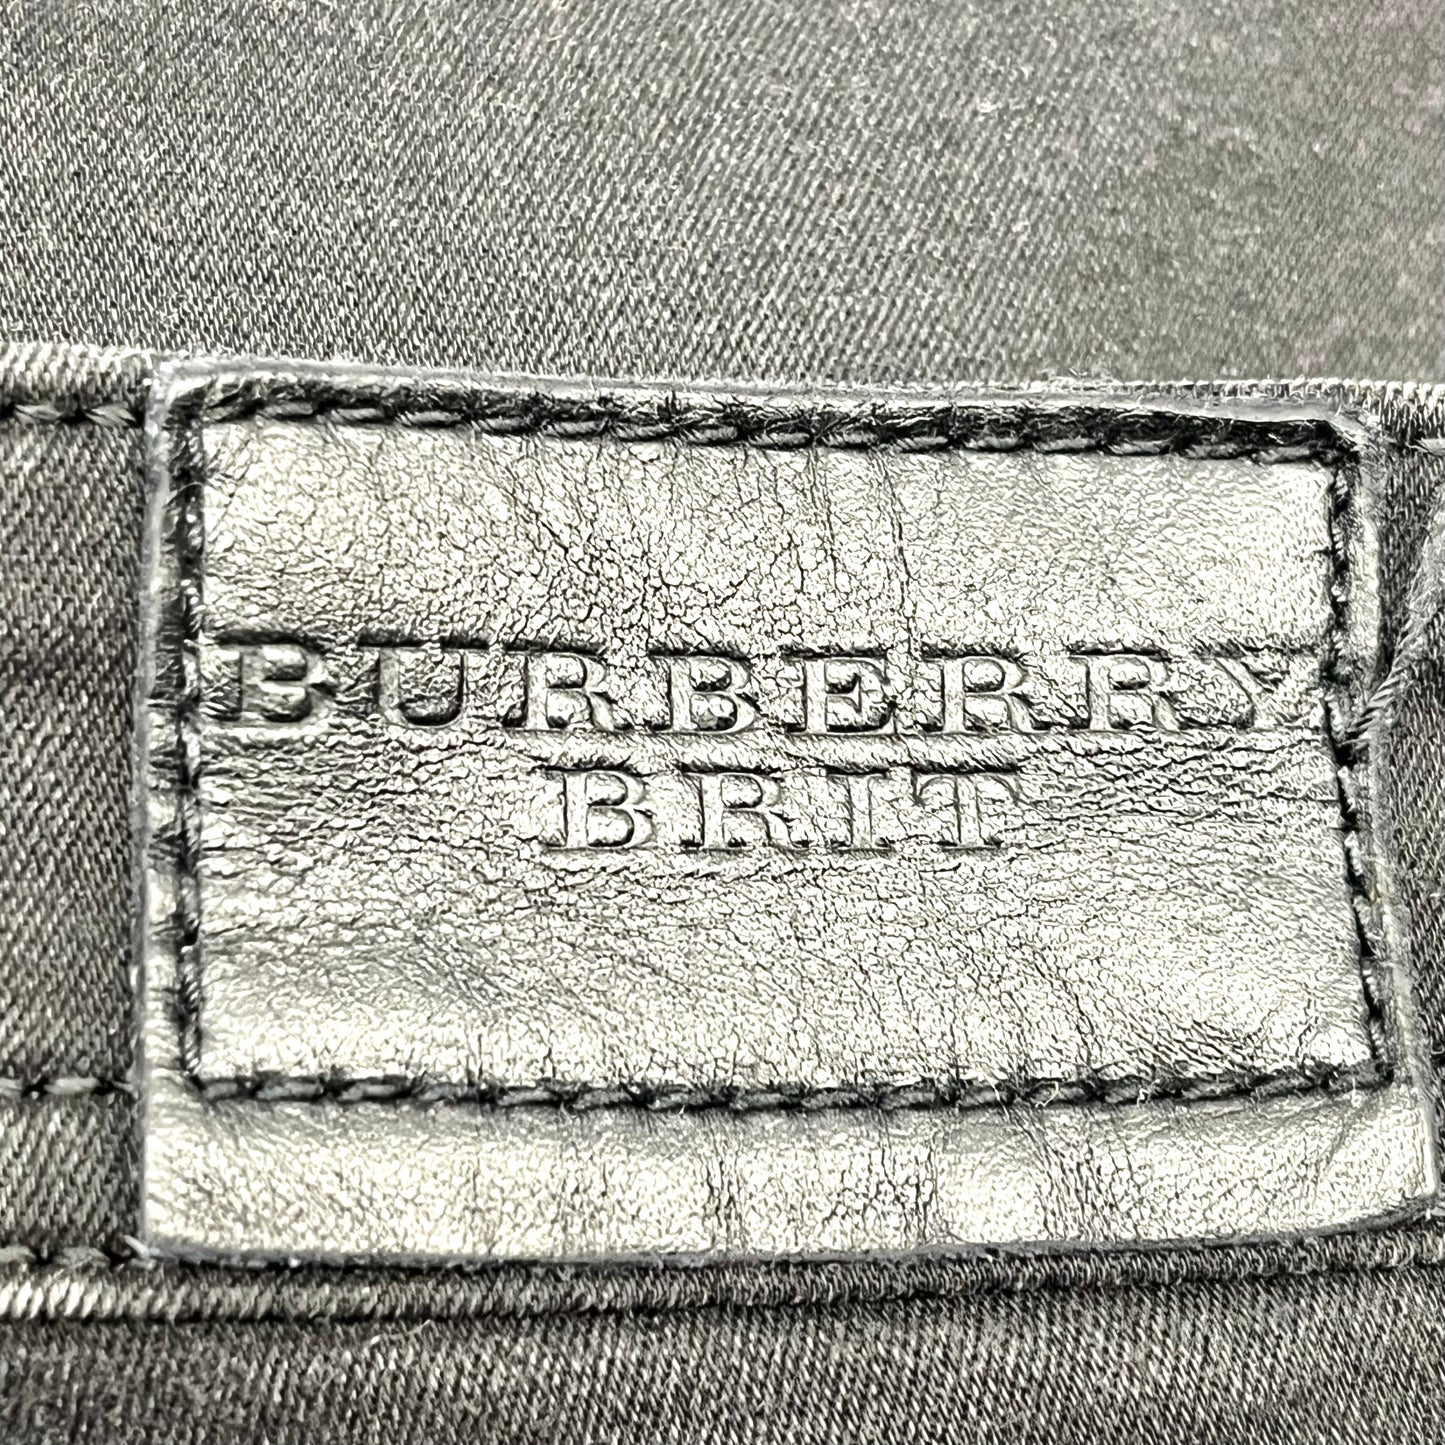 Jeans Luxury Designer By Burberry  Size: 10